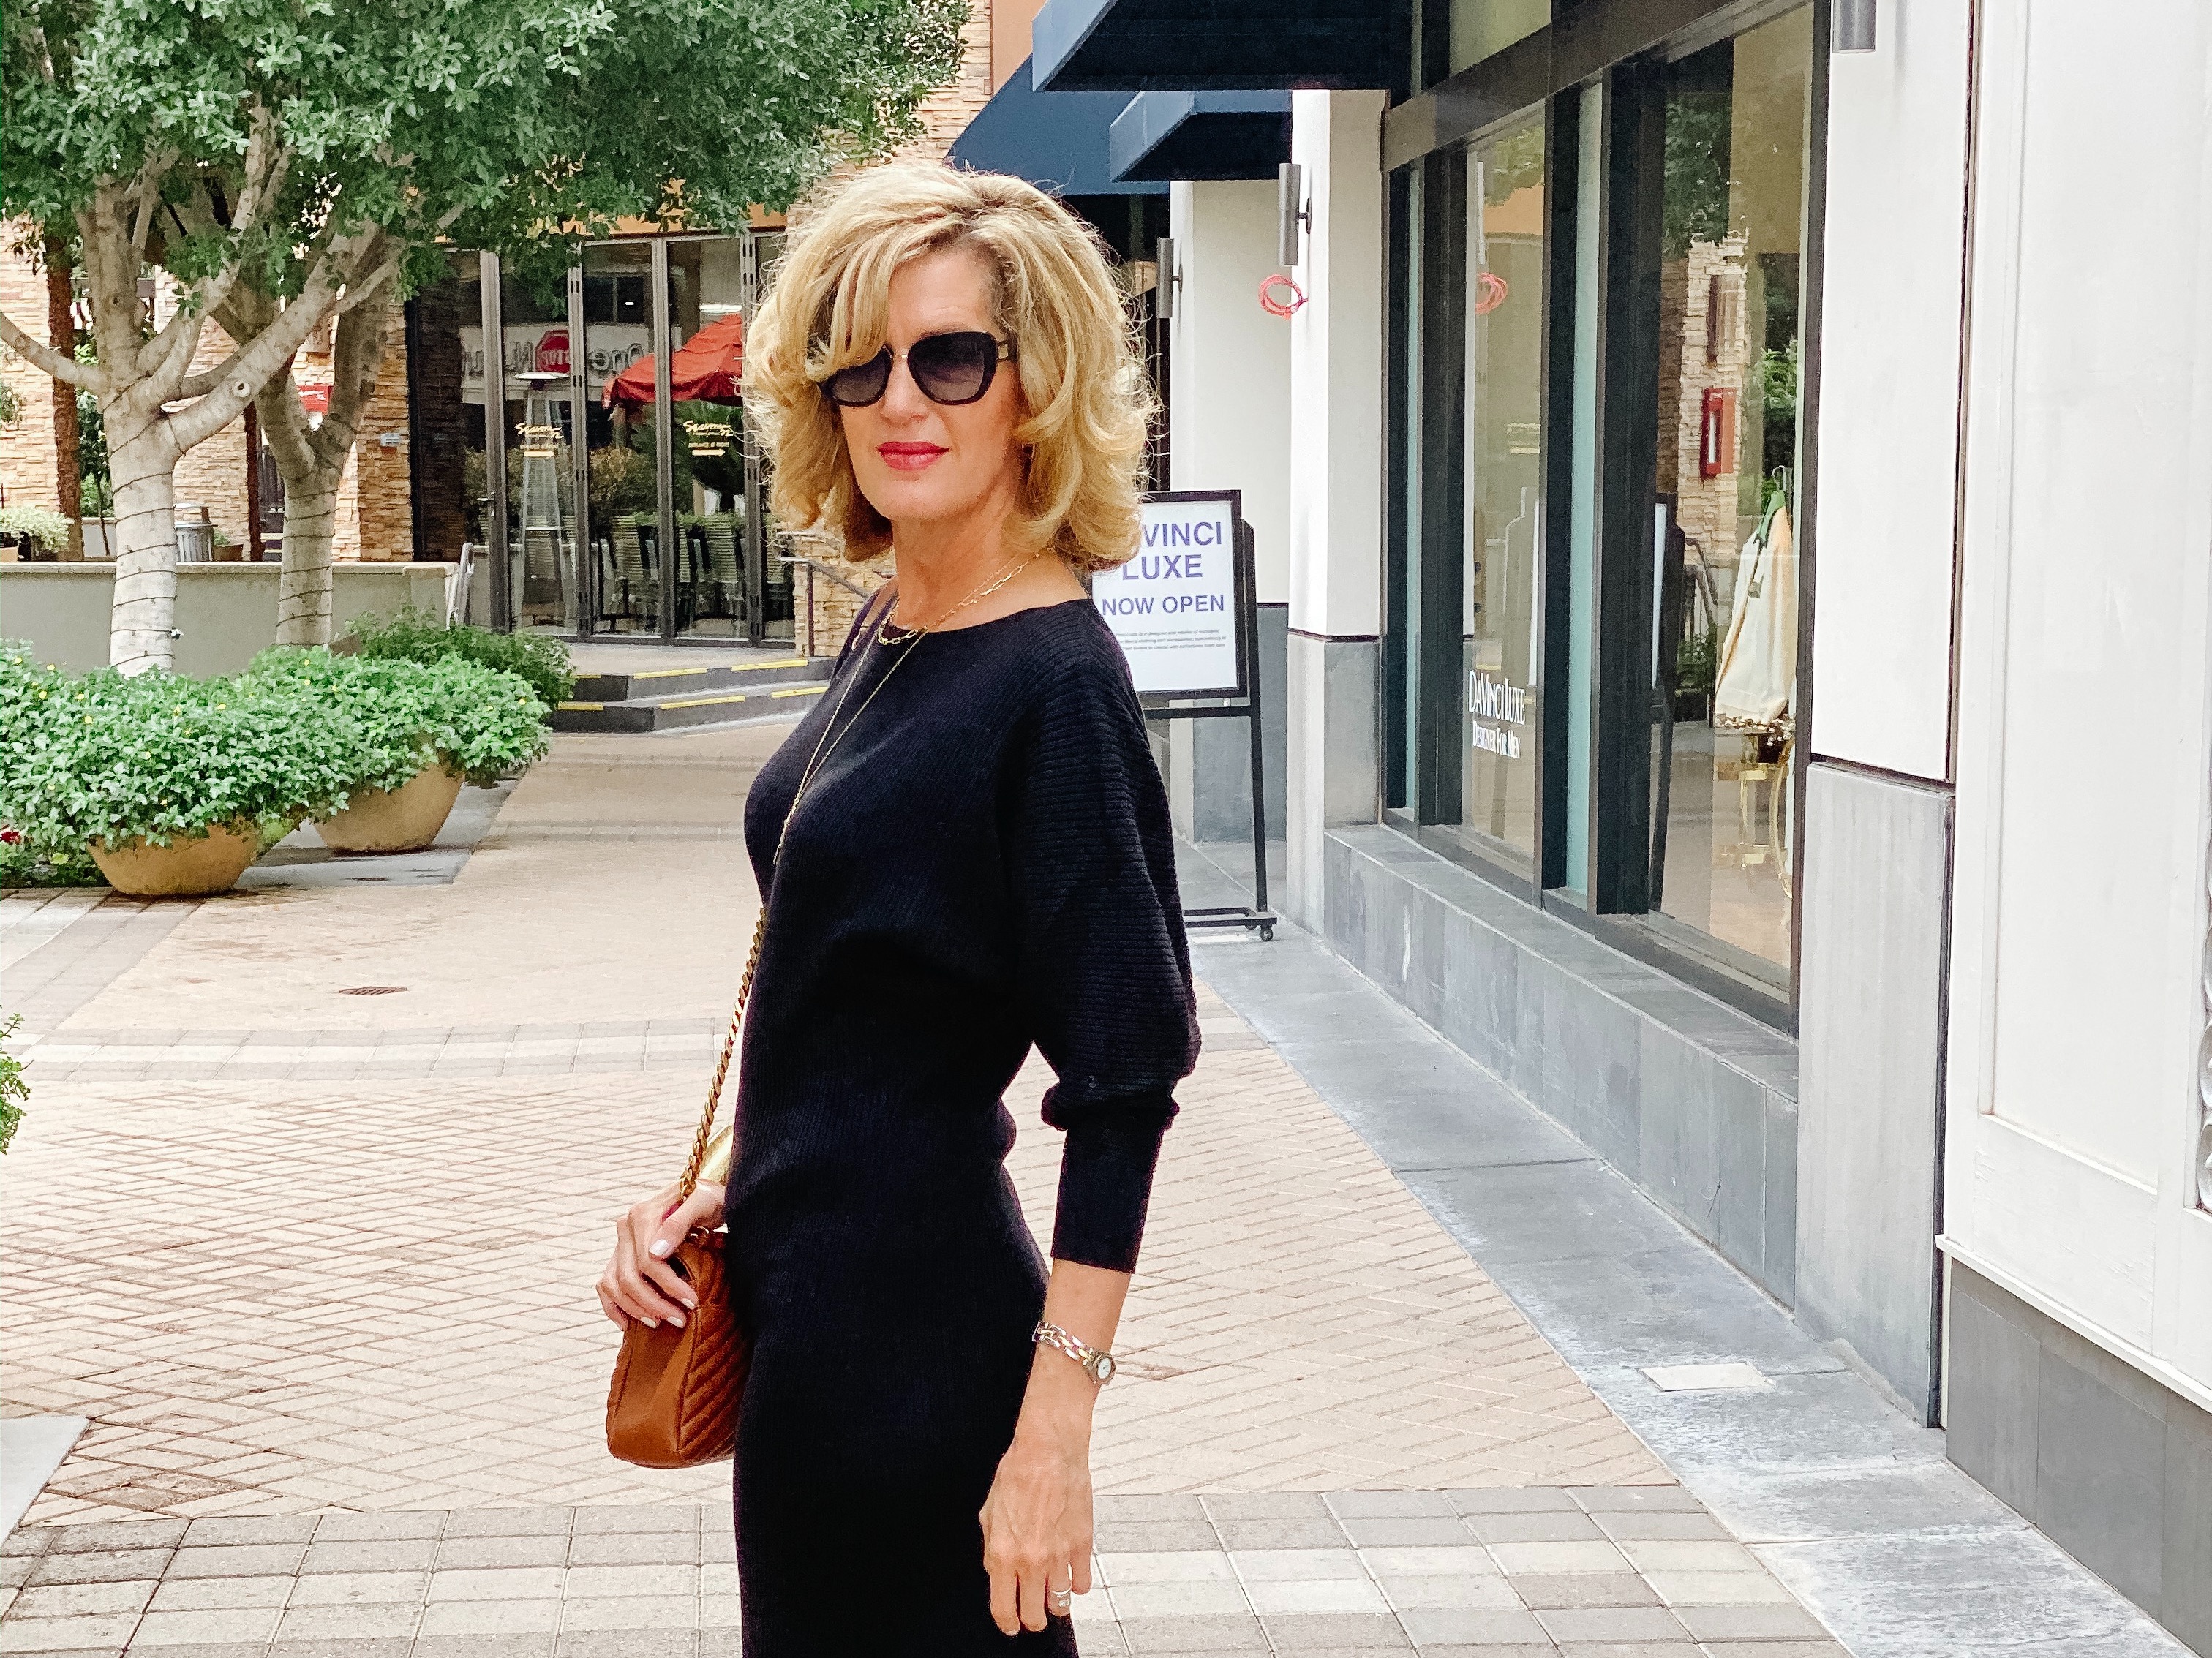 Lisa from Midlifeinbloom.com shows a flattering midi-length sweater dress